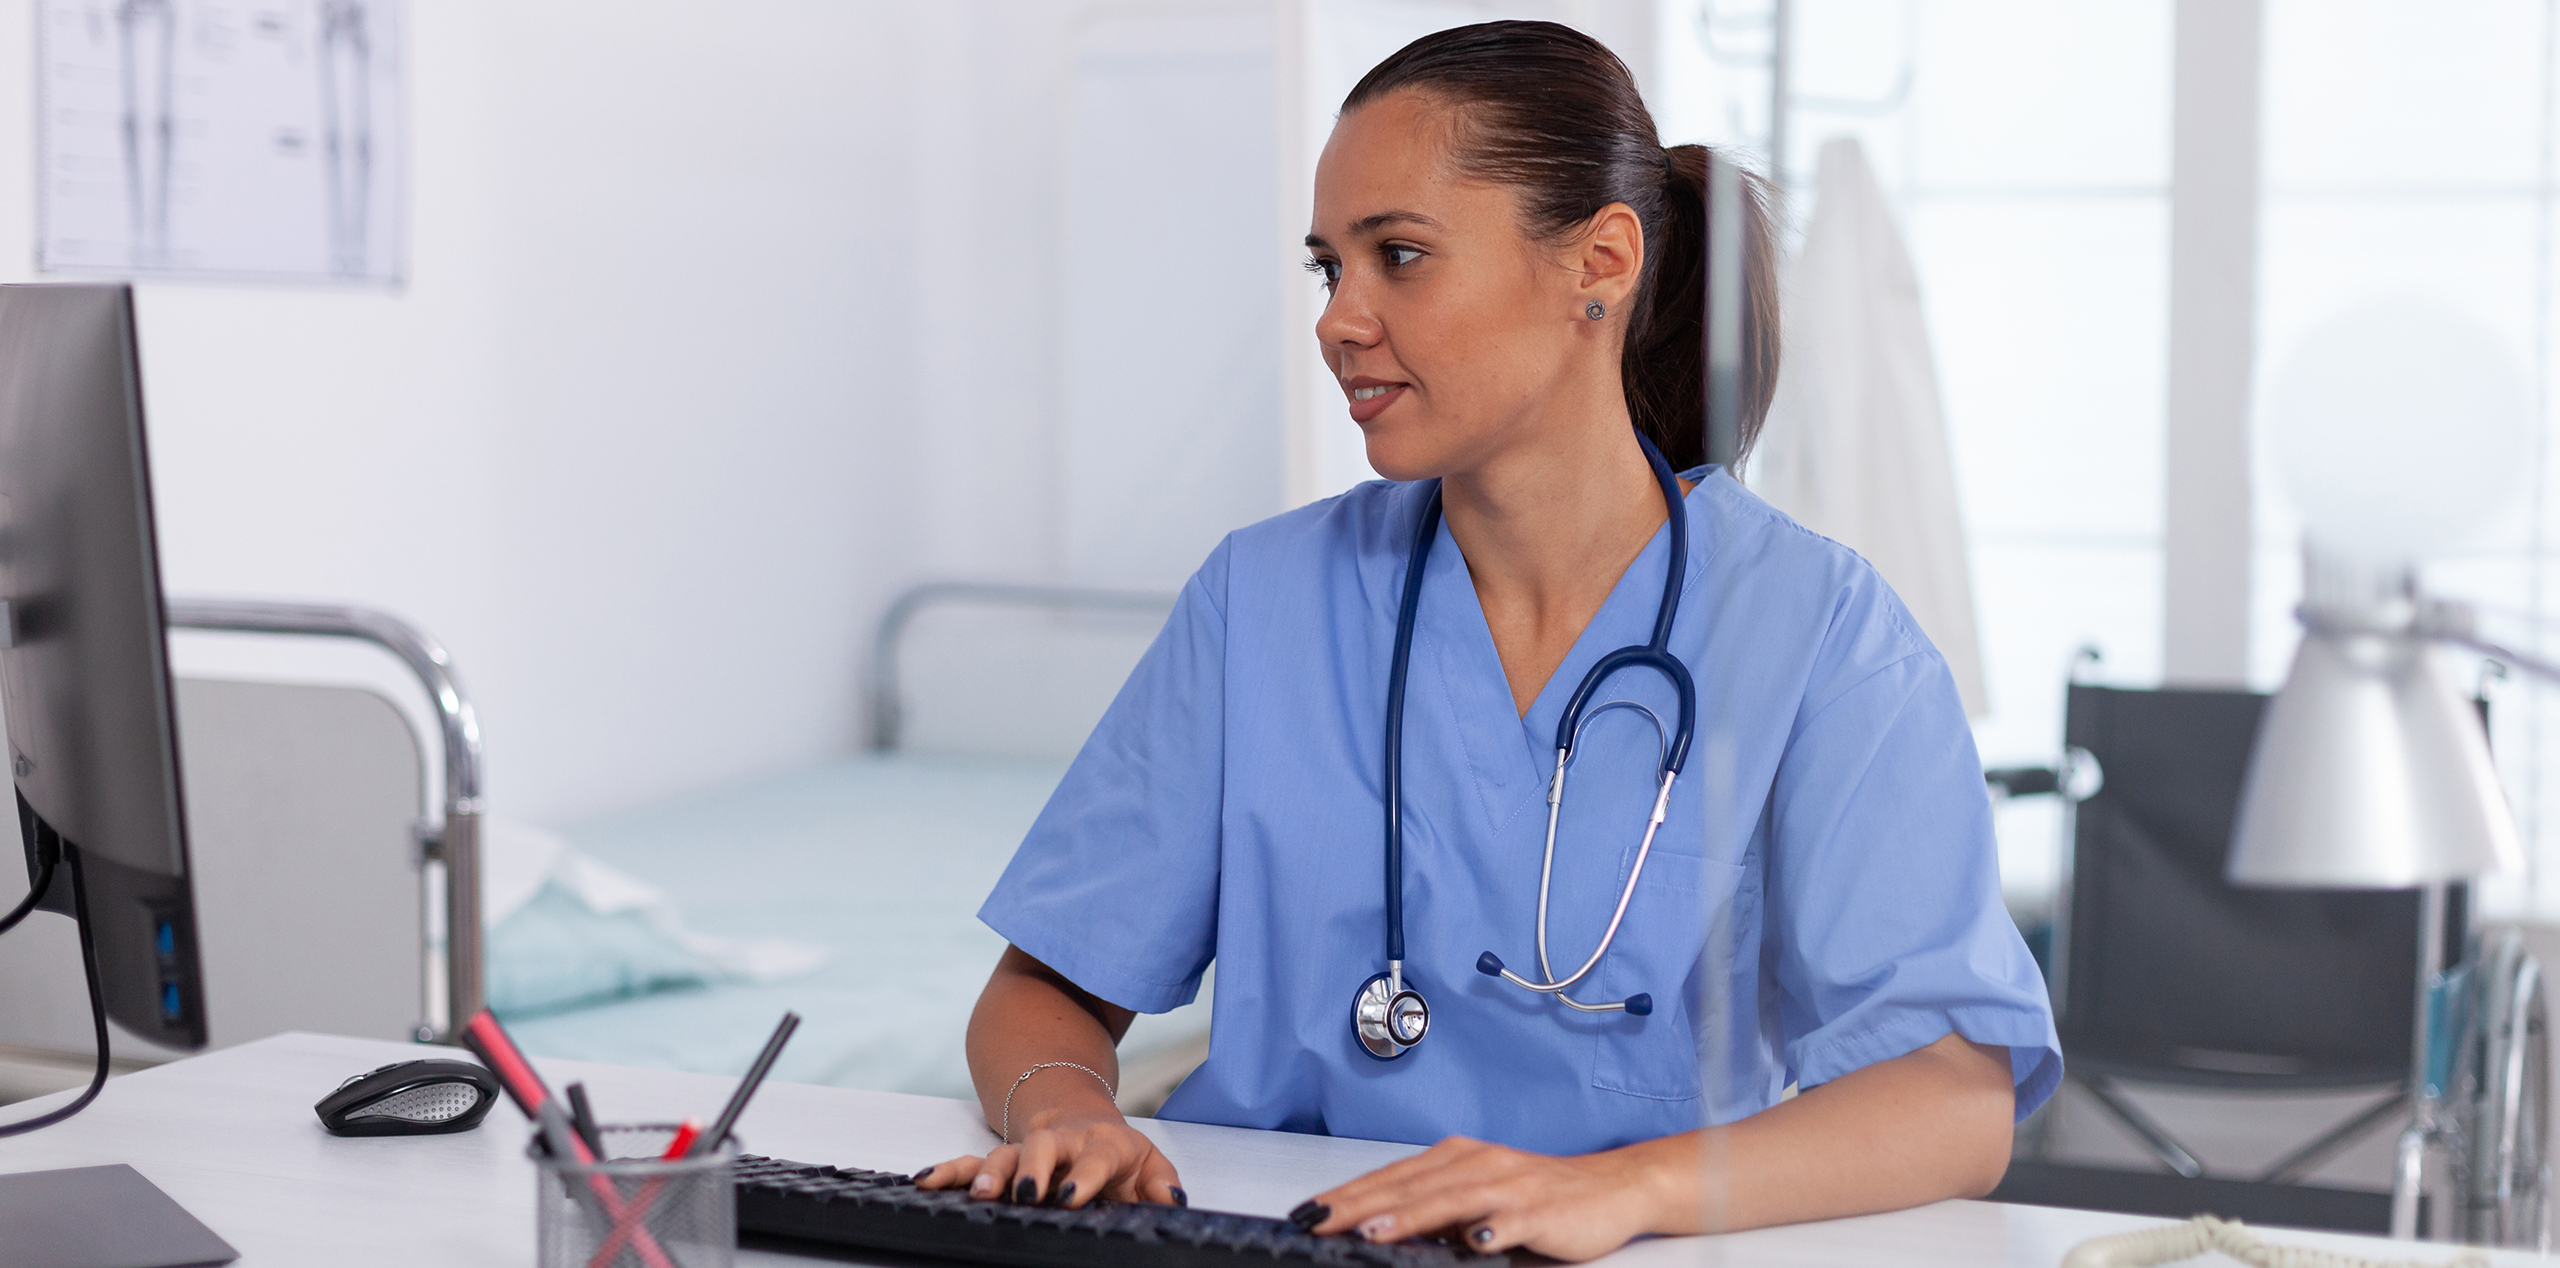 medical-practitioner-using-computer-in-hospital-office-health-care-physician-using-computer-in-modern-clinic-looking-at-monitor-medicine-profession-scrubs